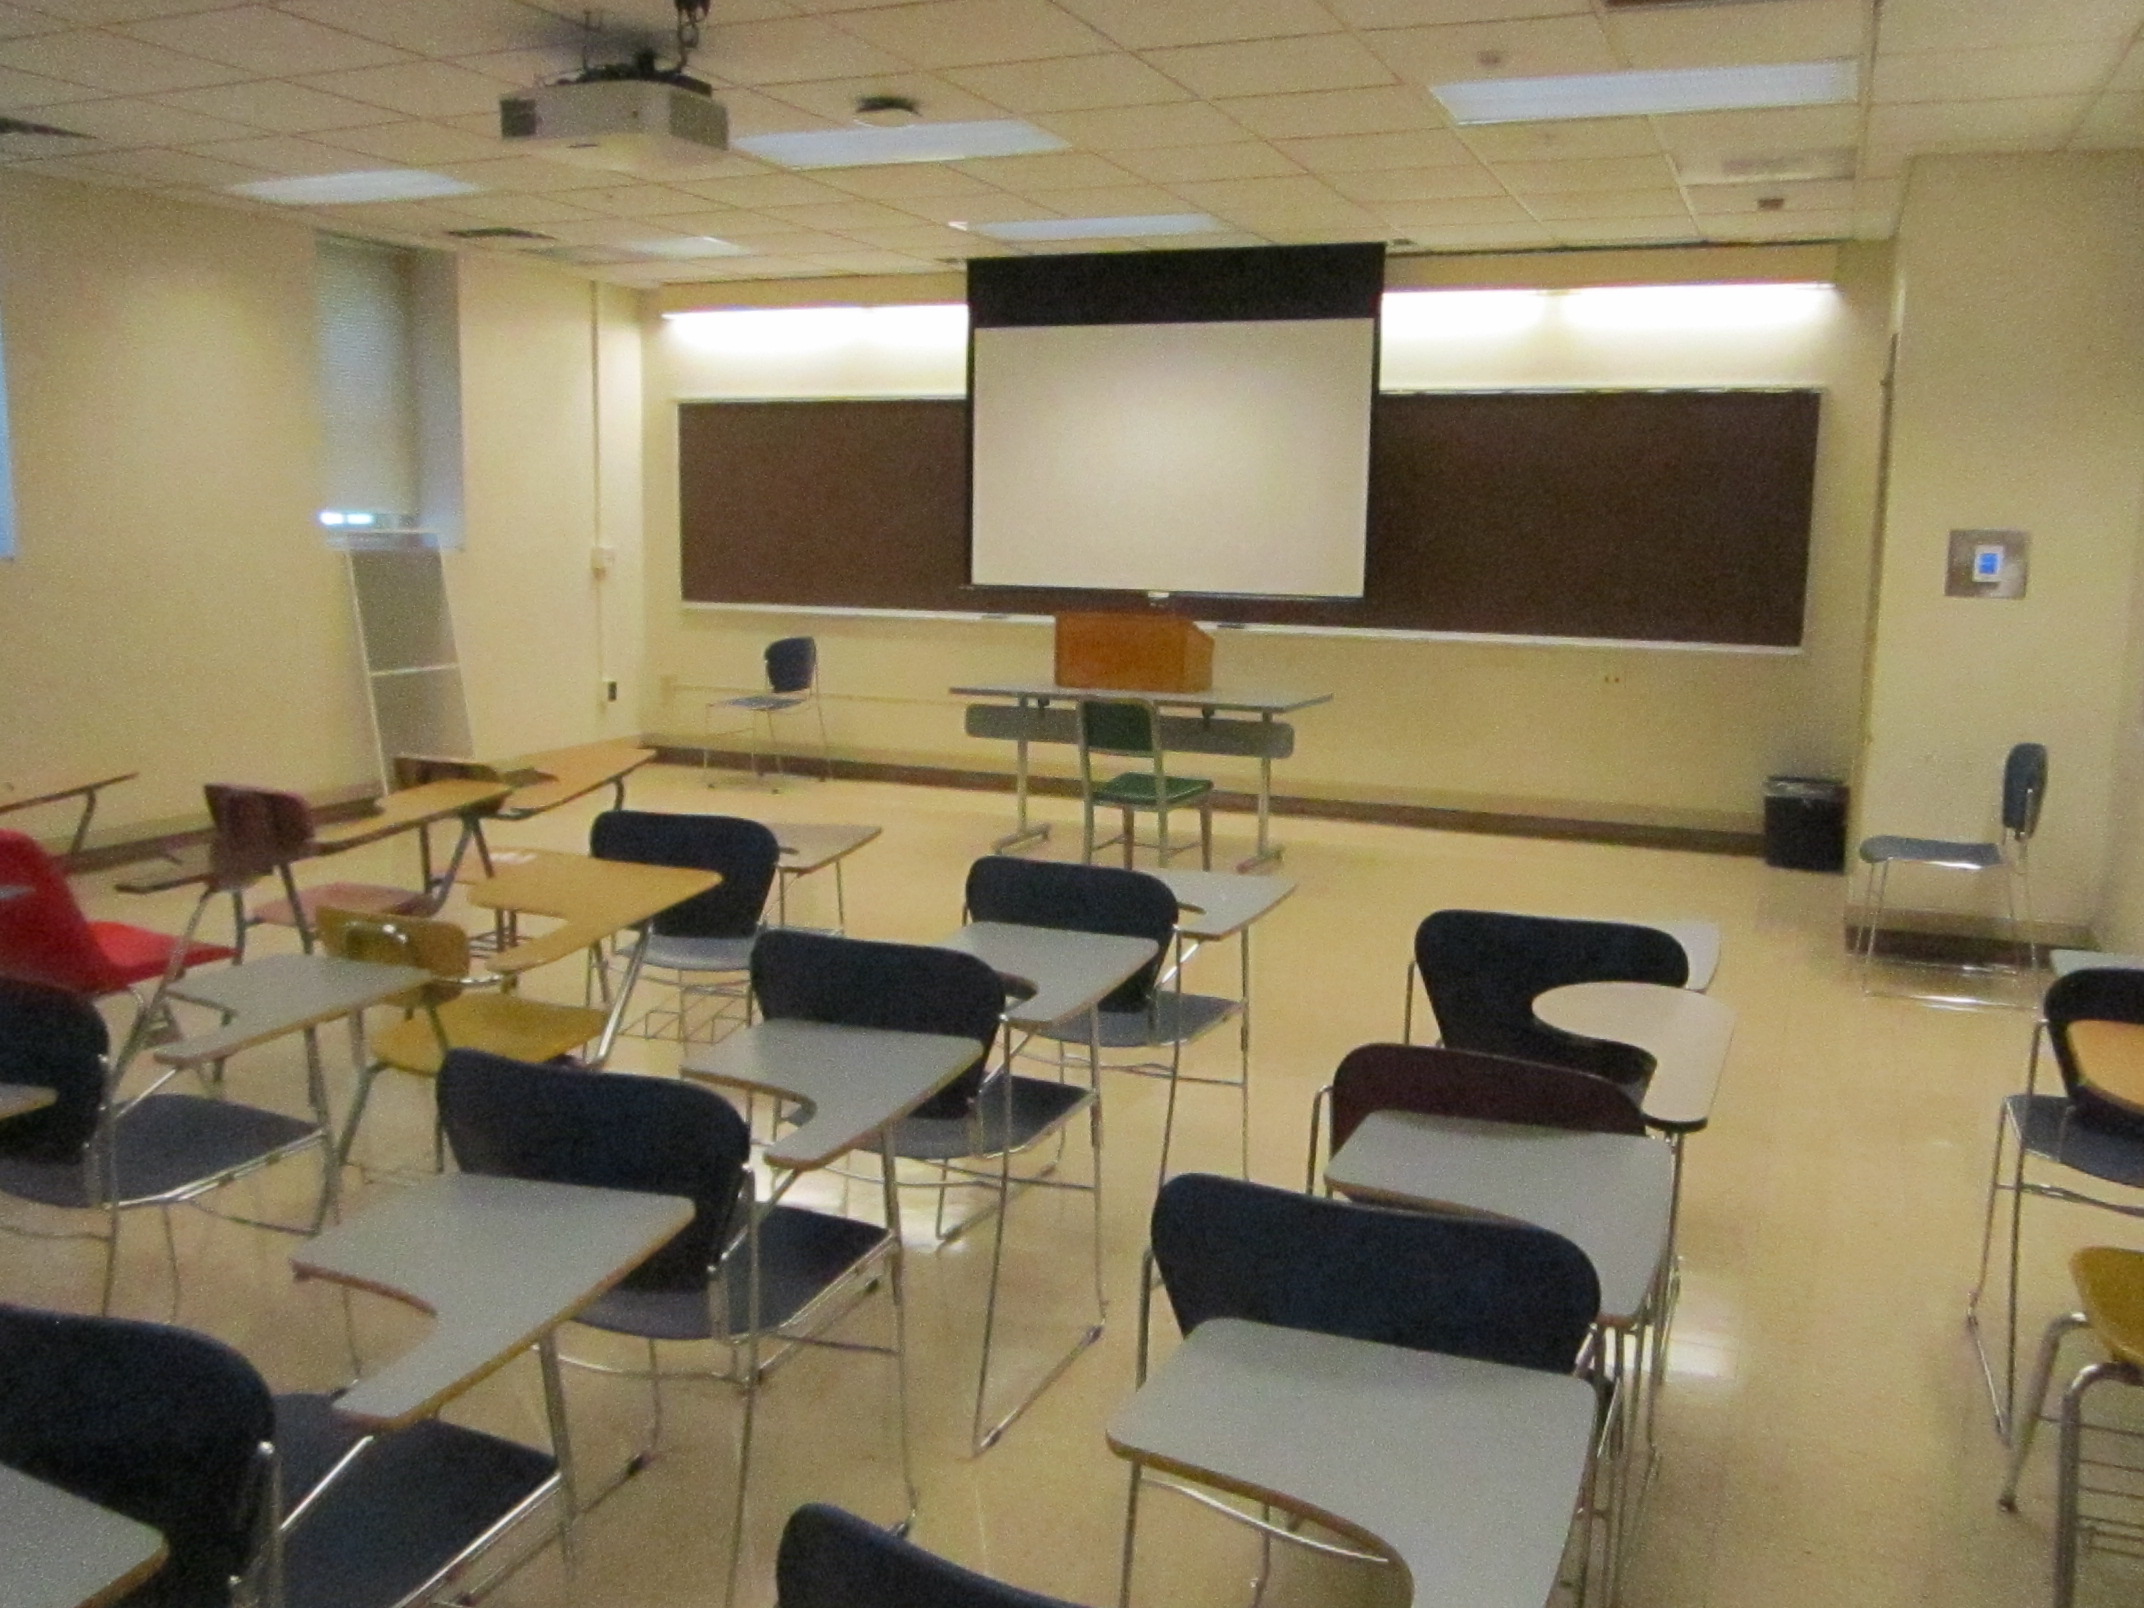 This is a view of the room, with student desks, a front lecture table, and a chalkboard.